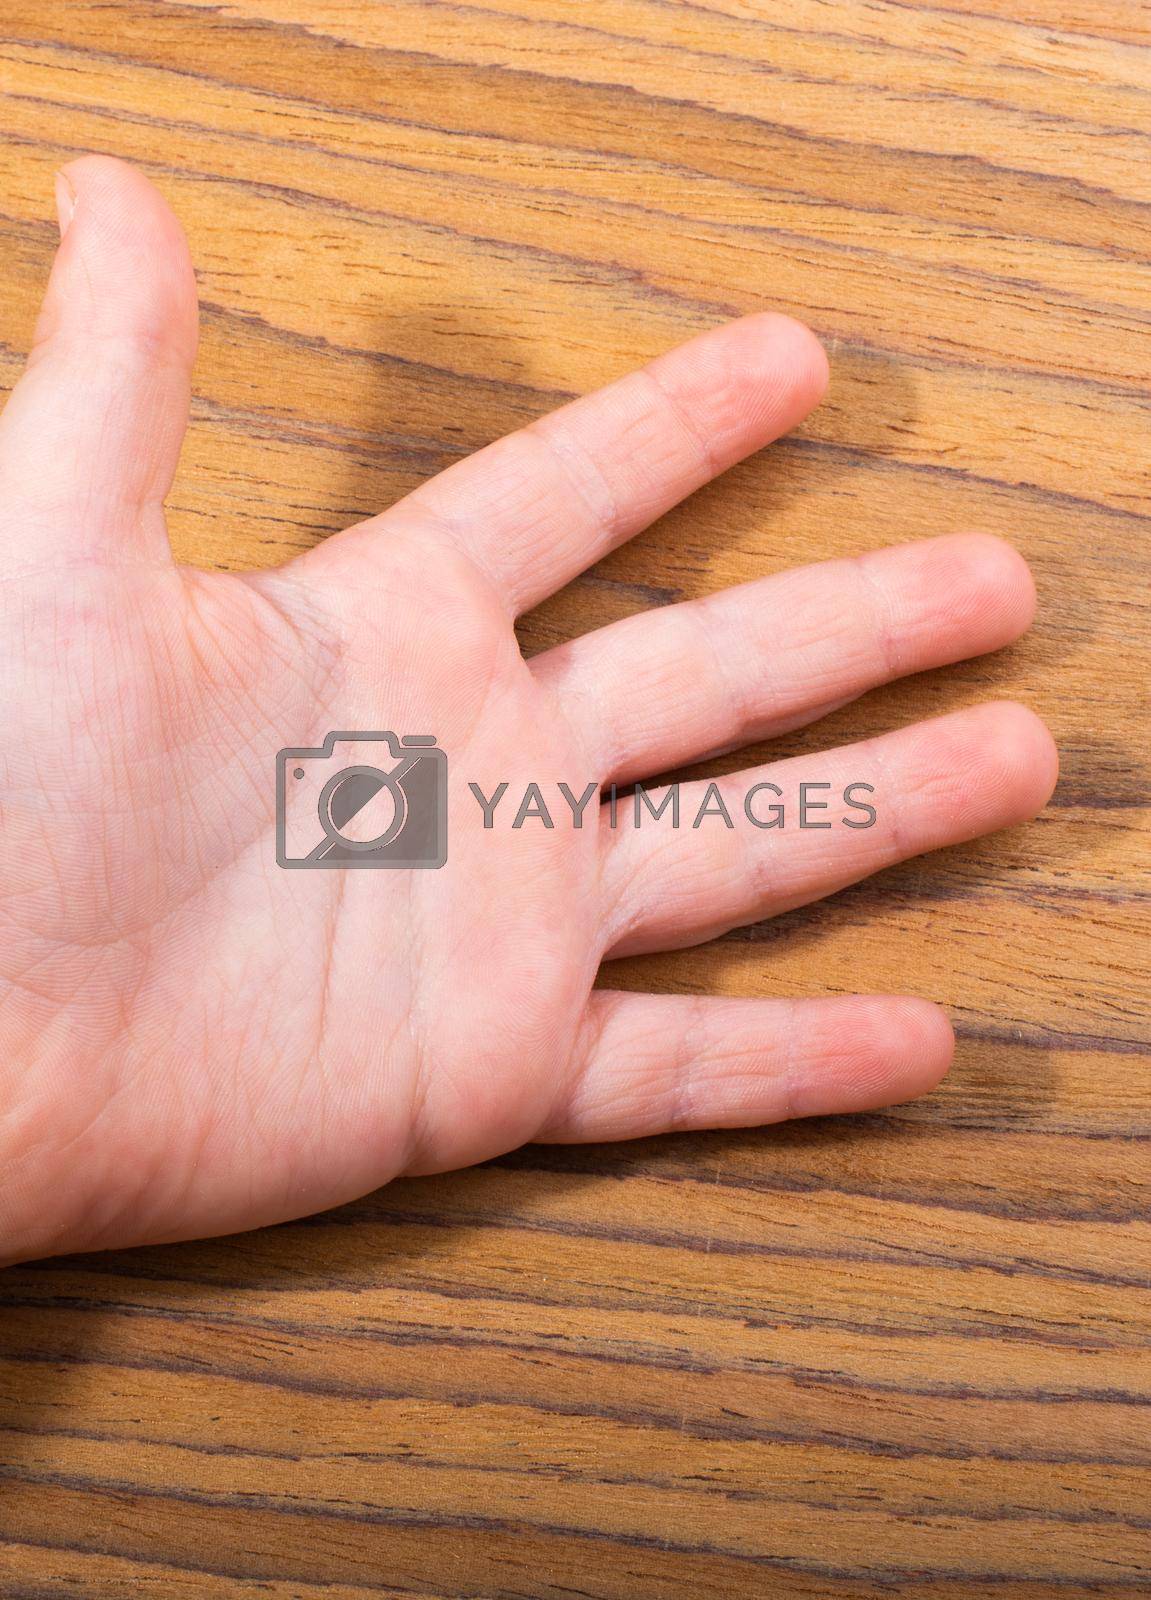 Toddlers hand open with five fingers on wooden texture